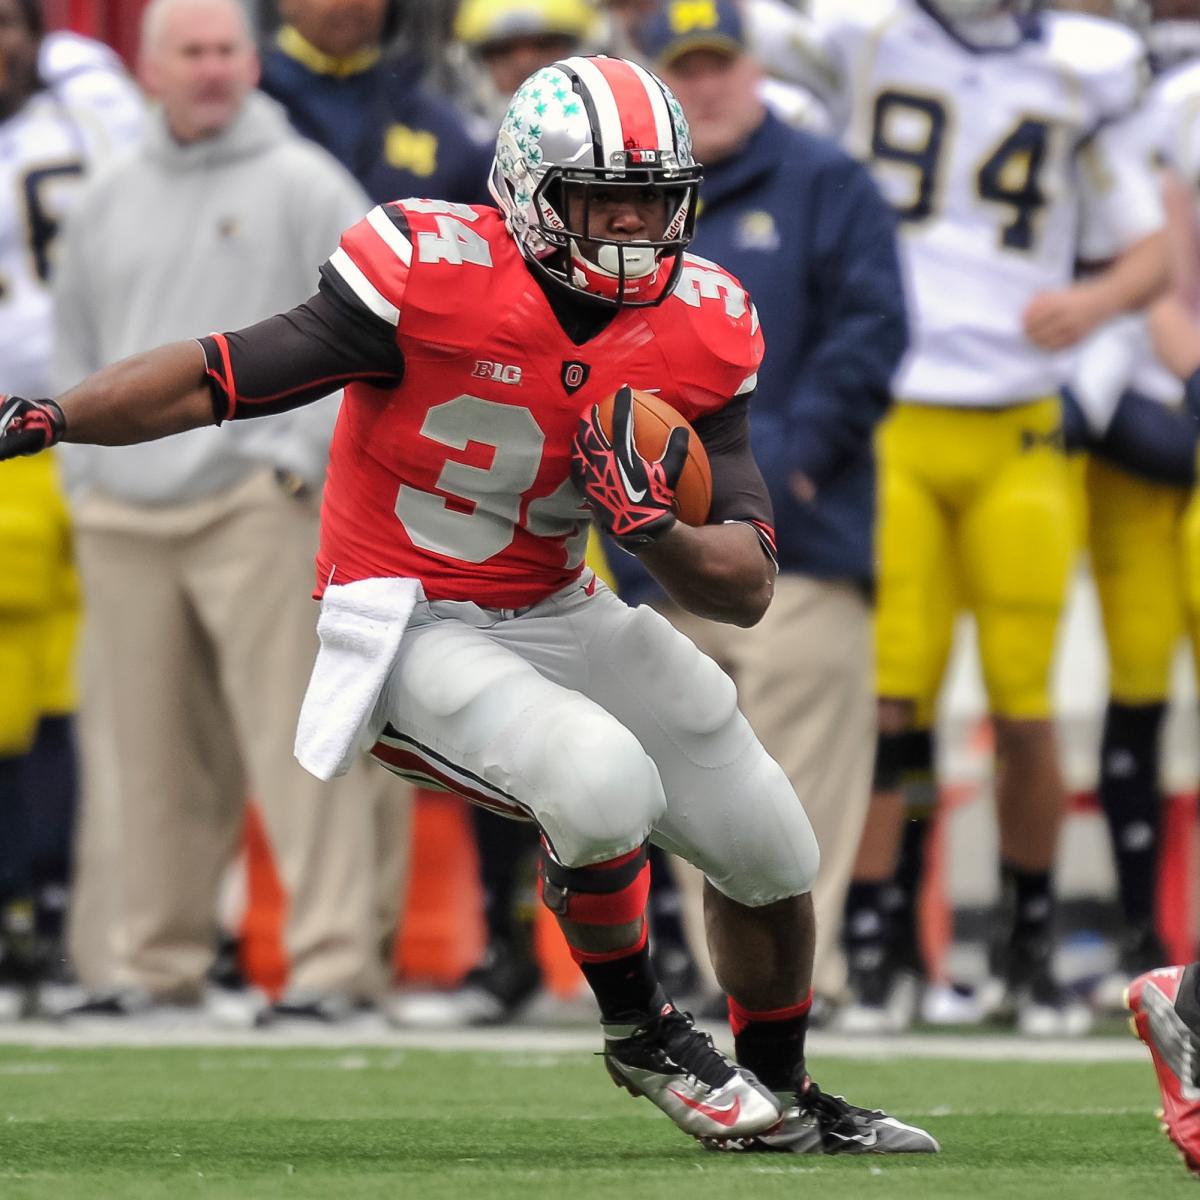 Carlos Hyde's Suspension Will Derail Ohio State's Rushing